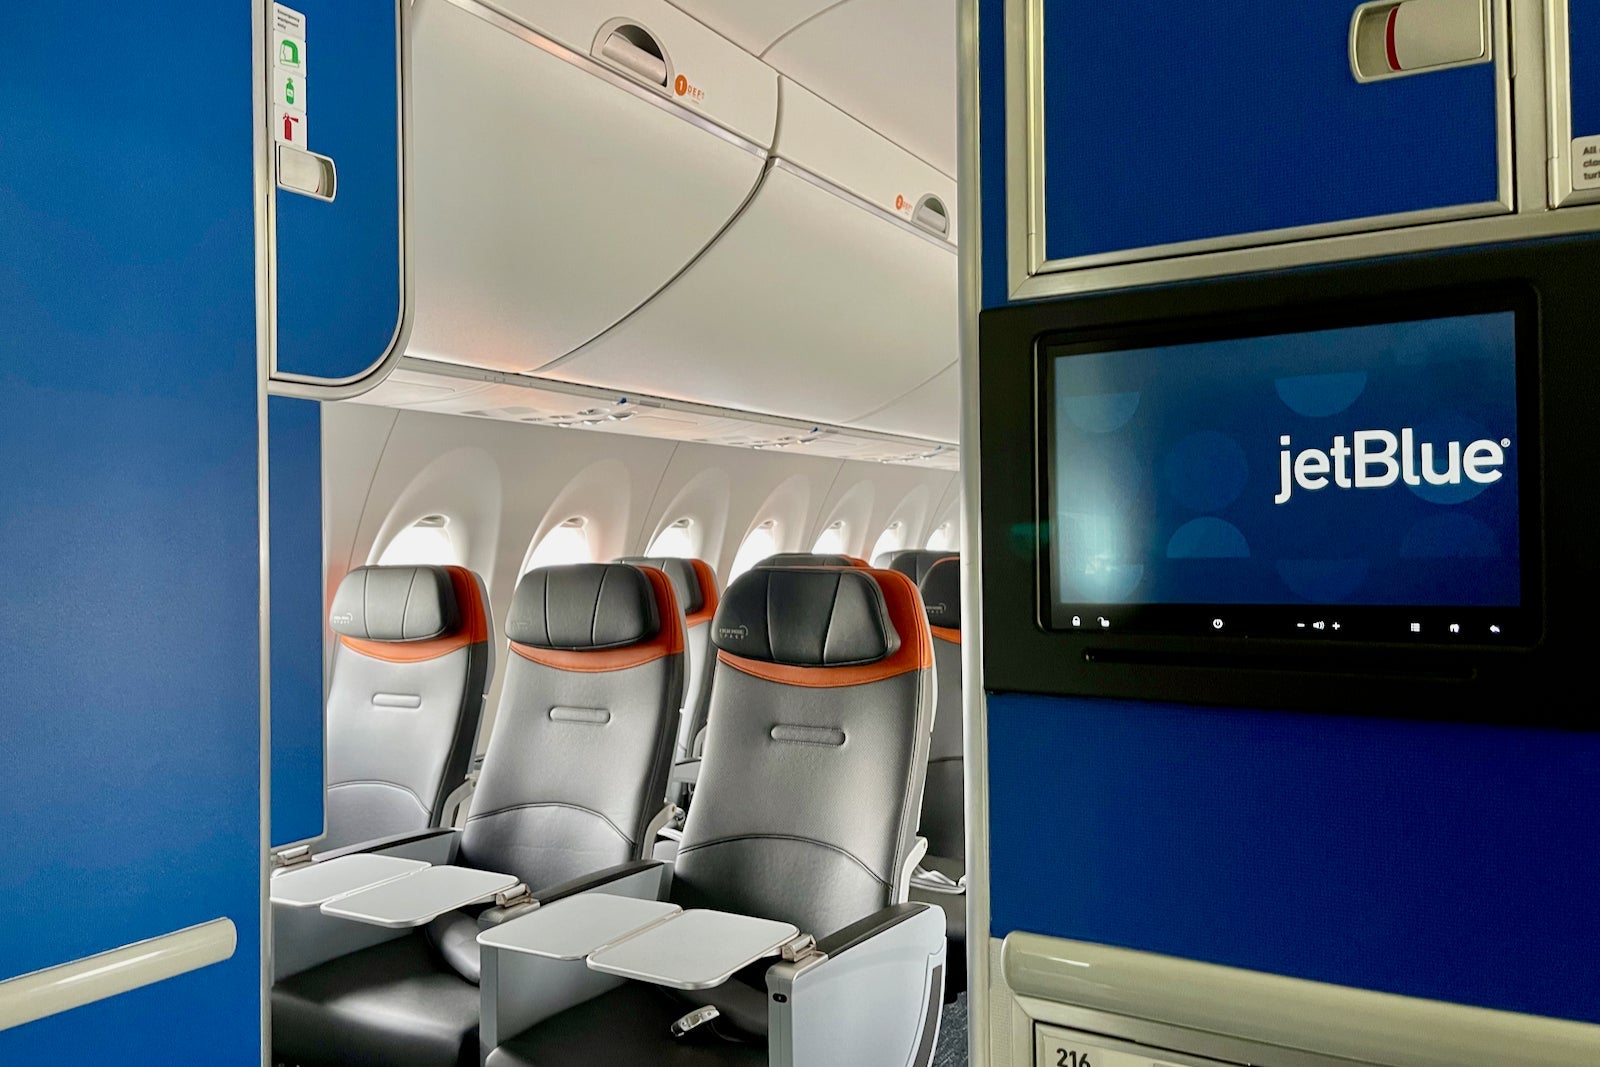 JetBlue cuts a whopping 27 routes in sweeping network update